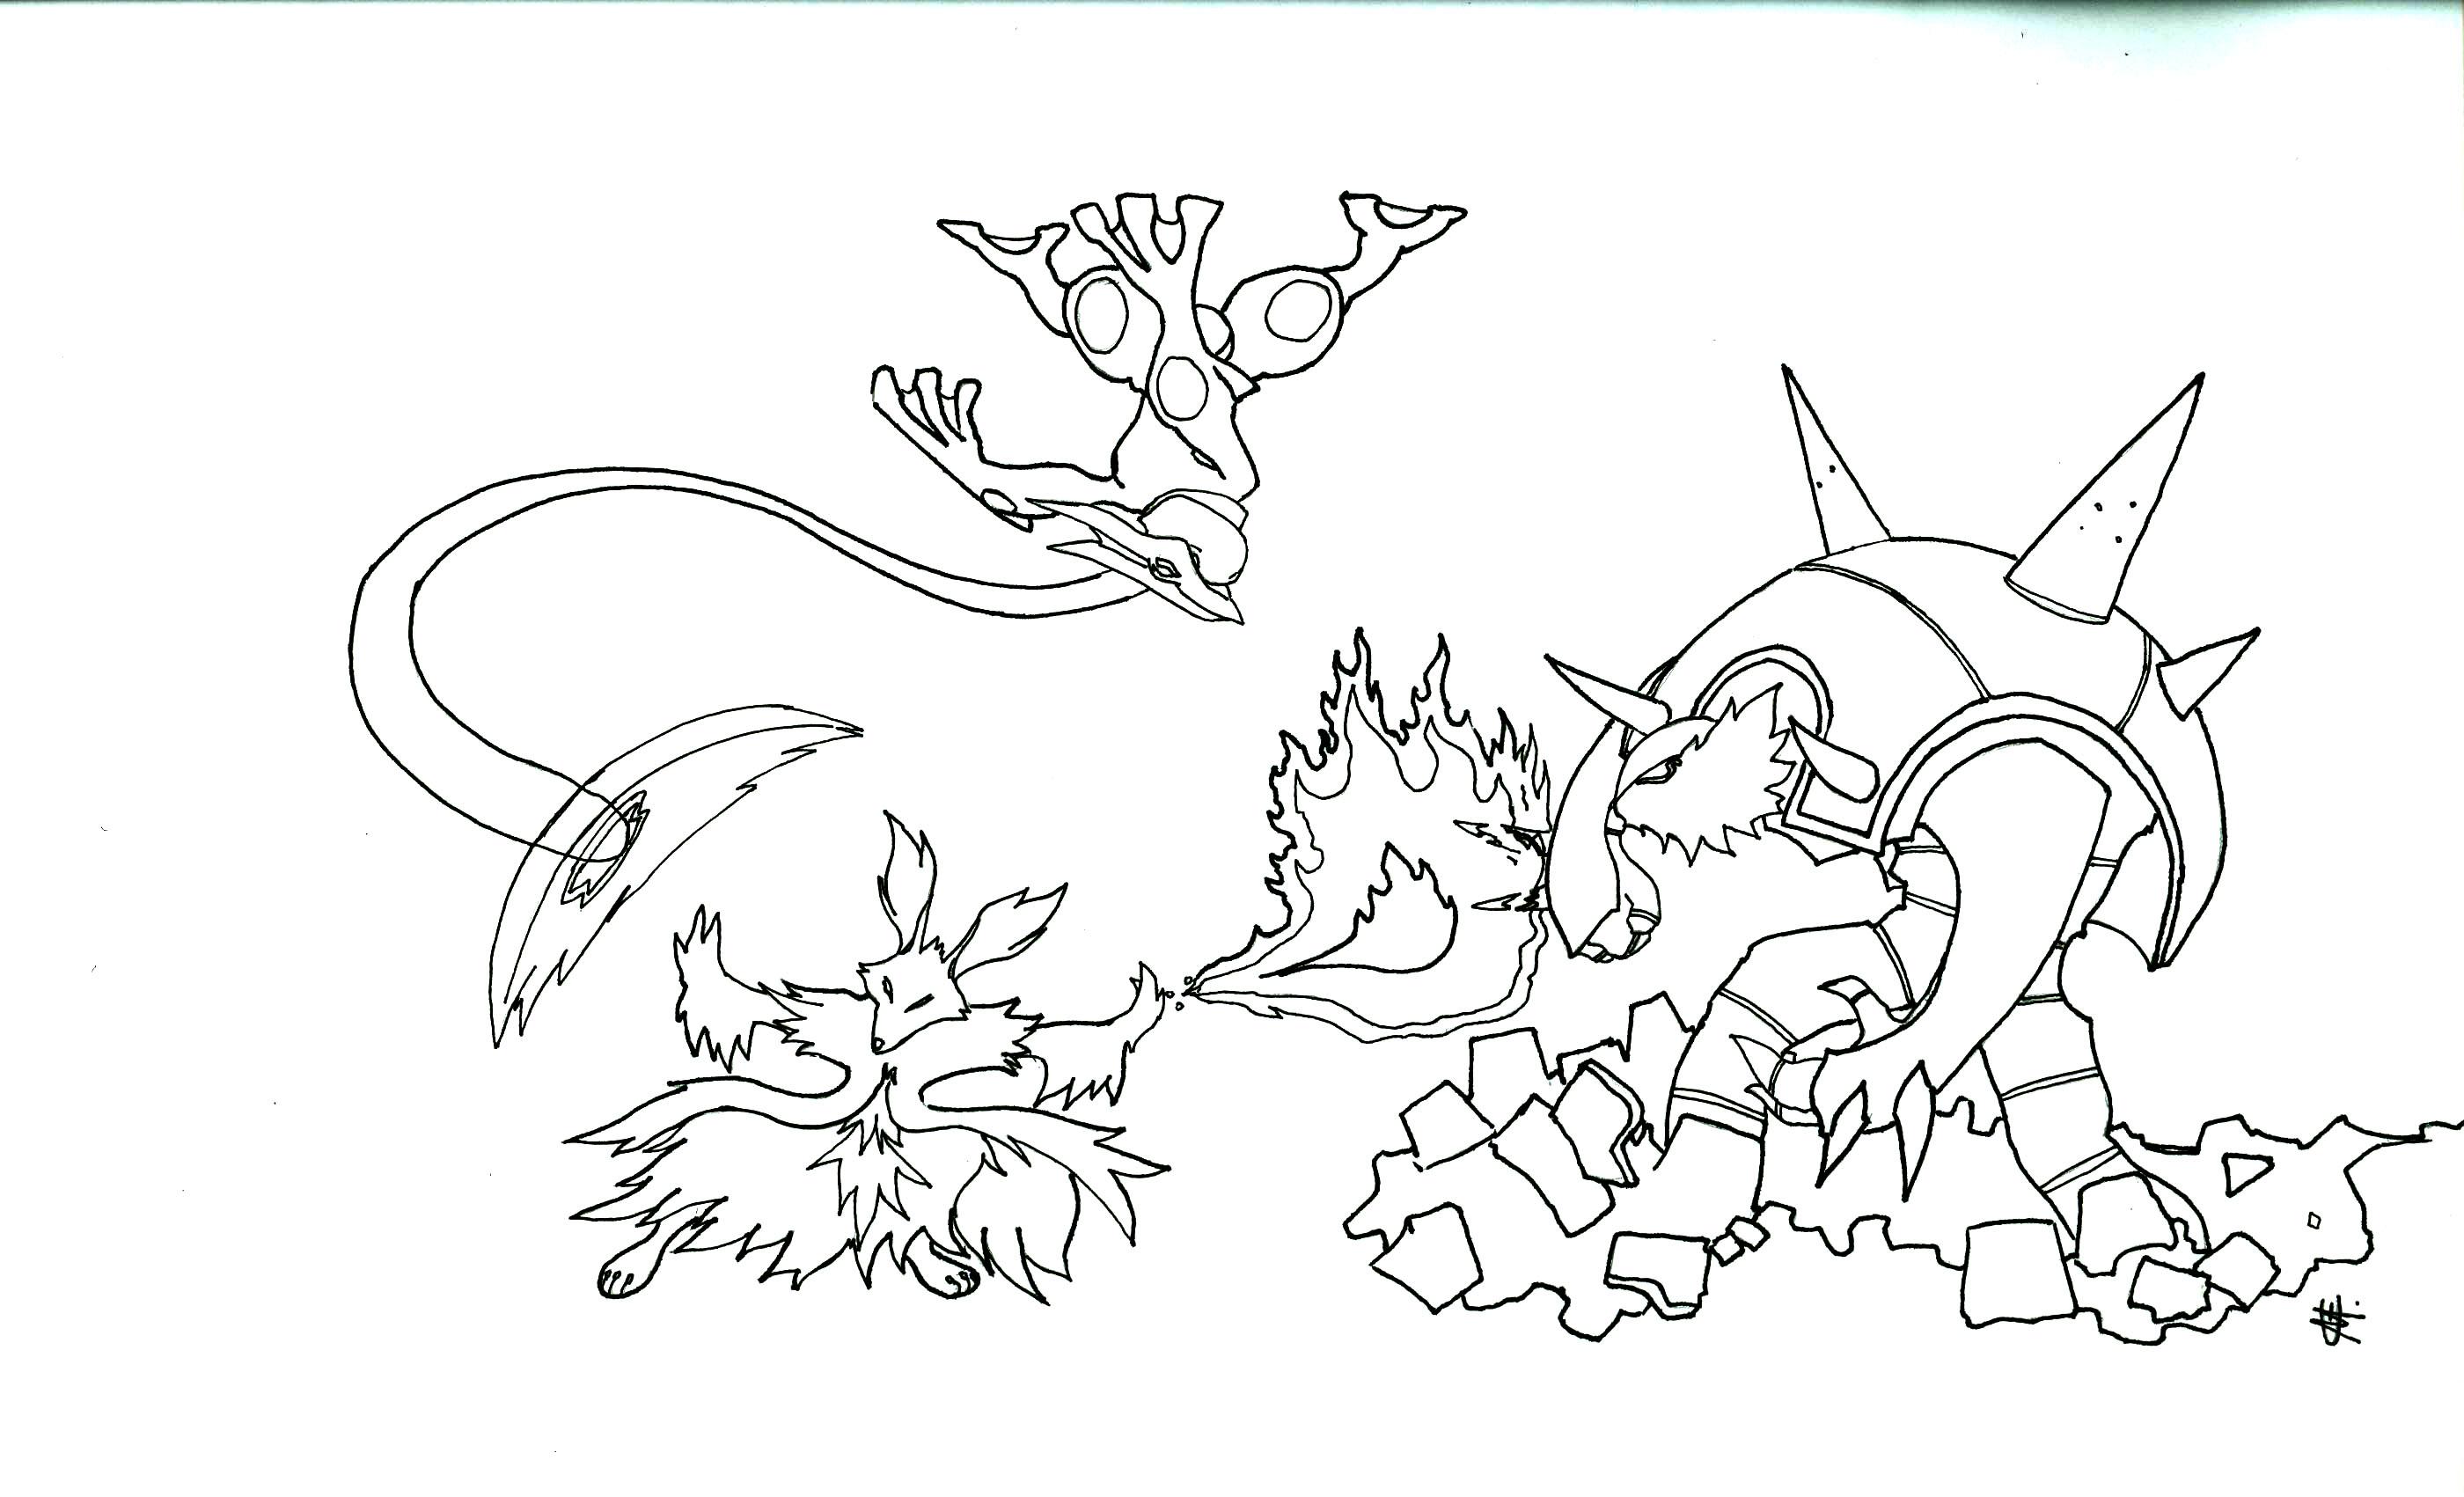 different pokemon x and y